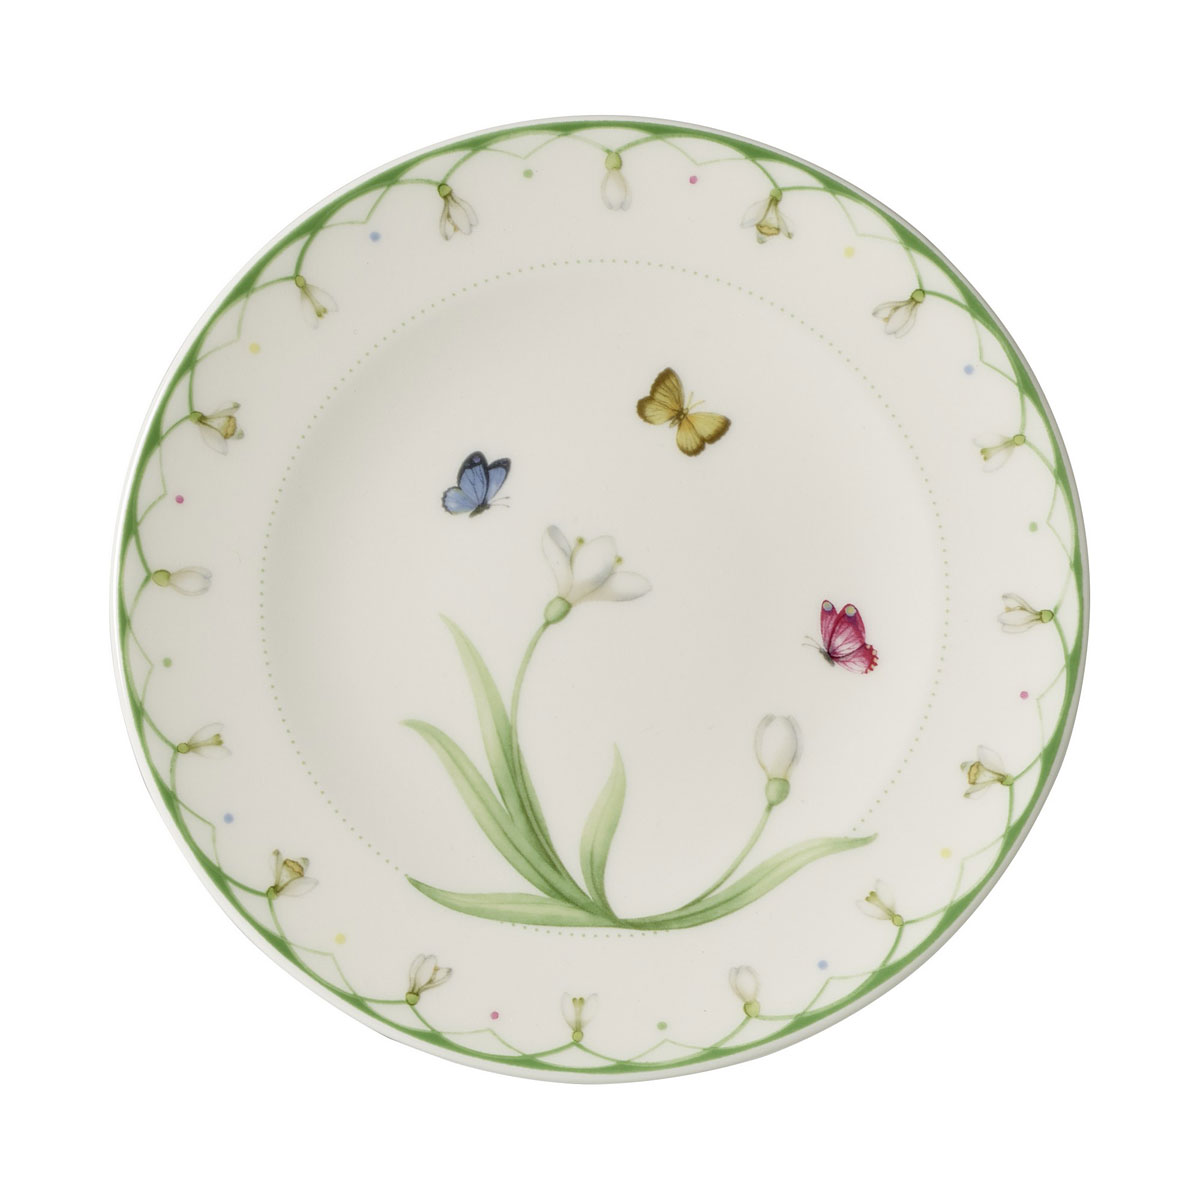 Villeroy and Boch Colourful Spring Bread and Butter Plate